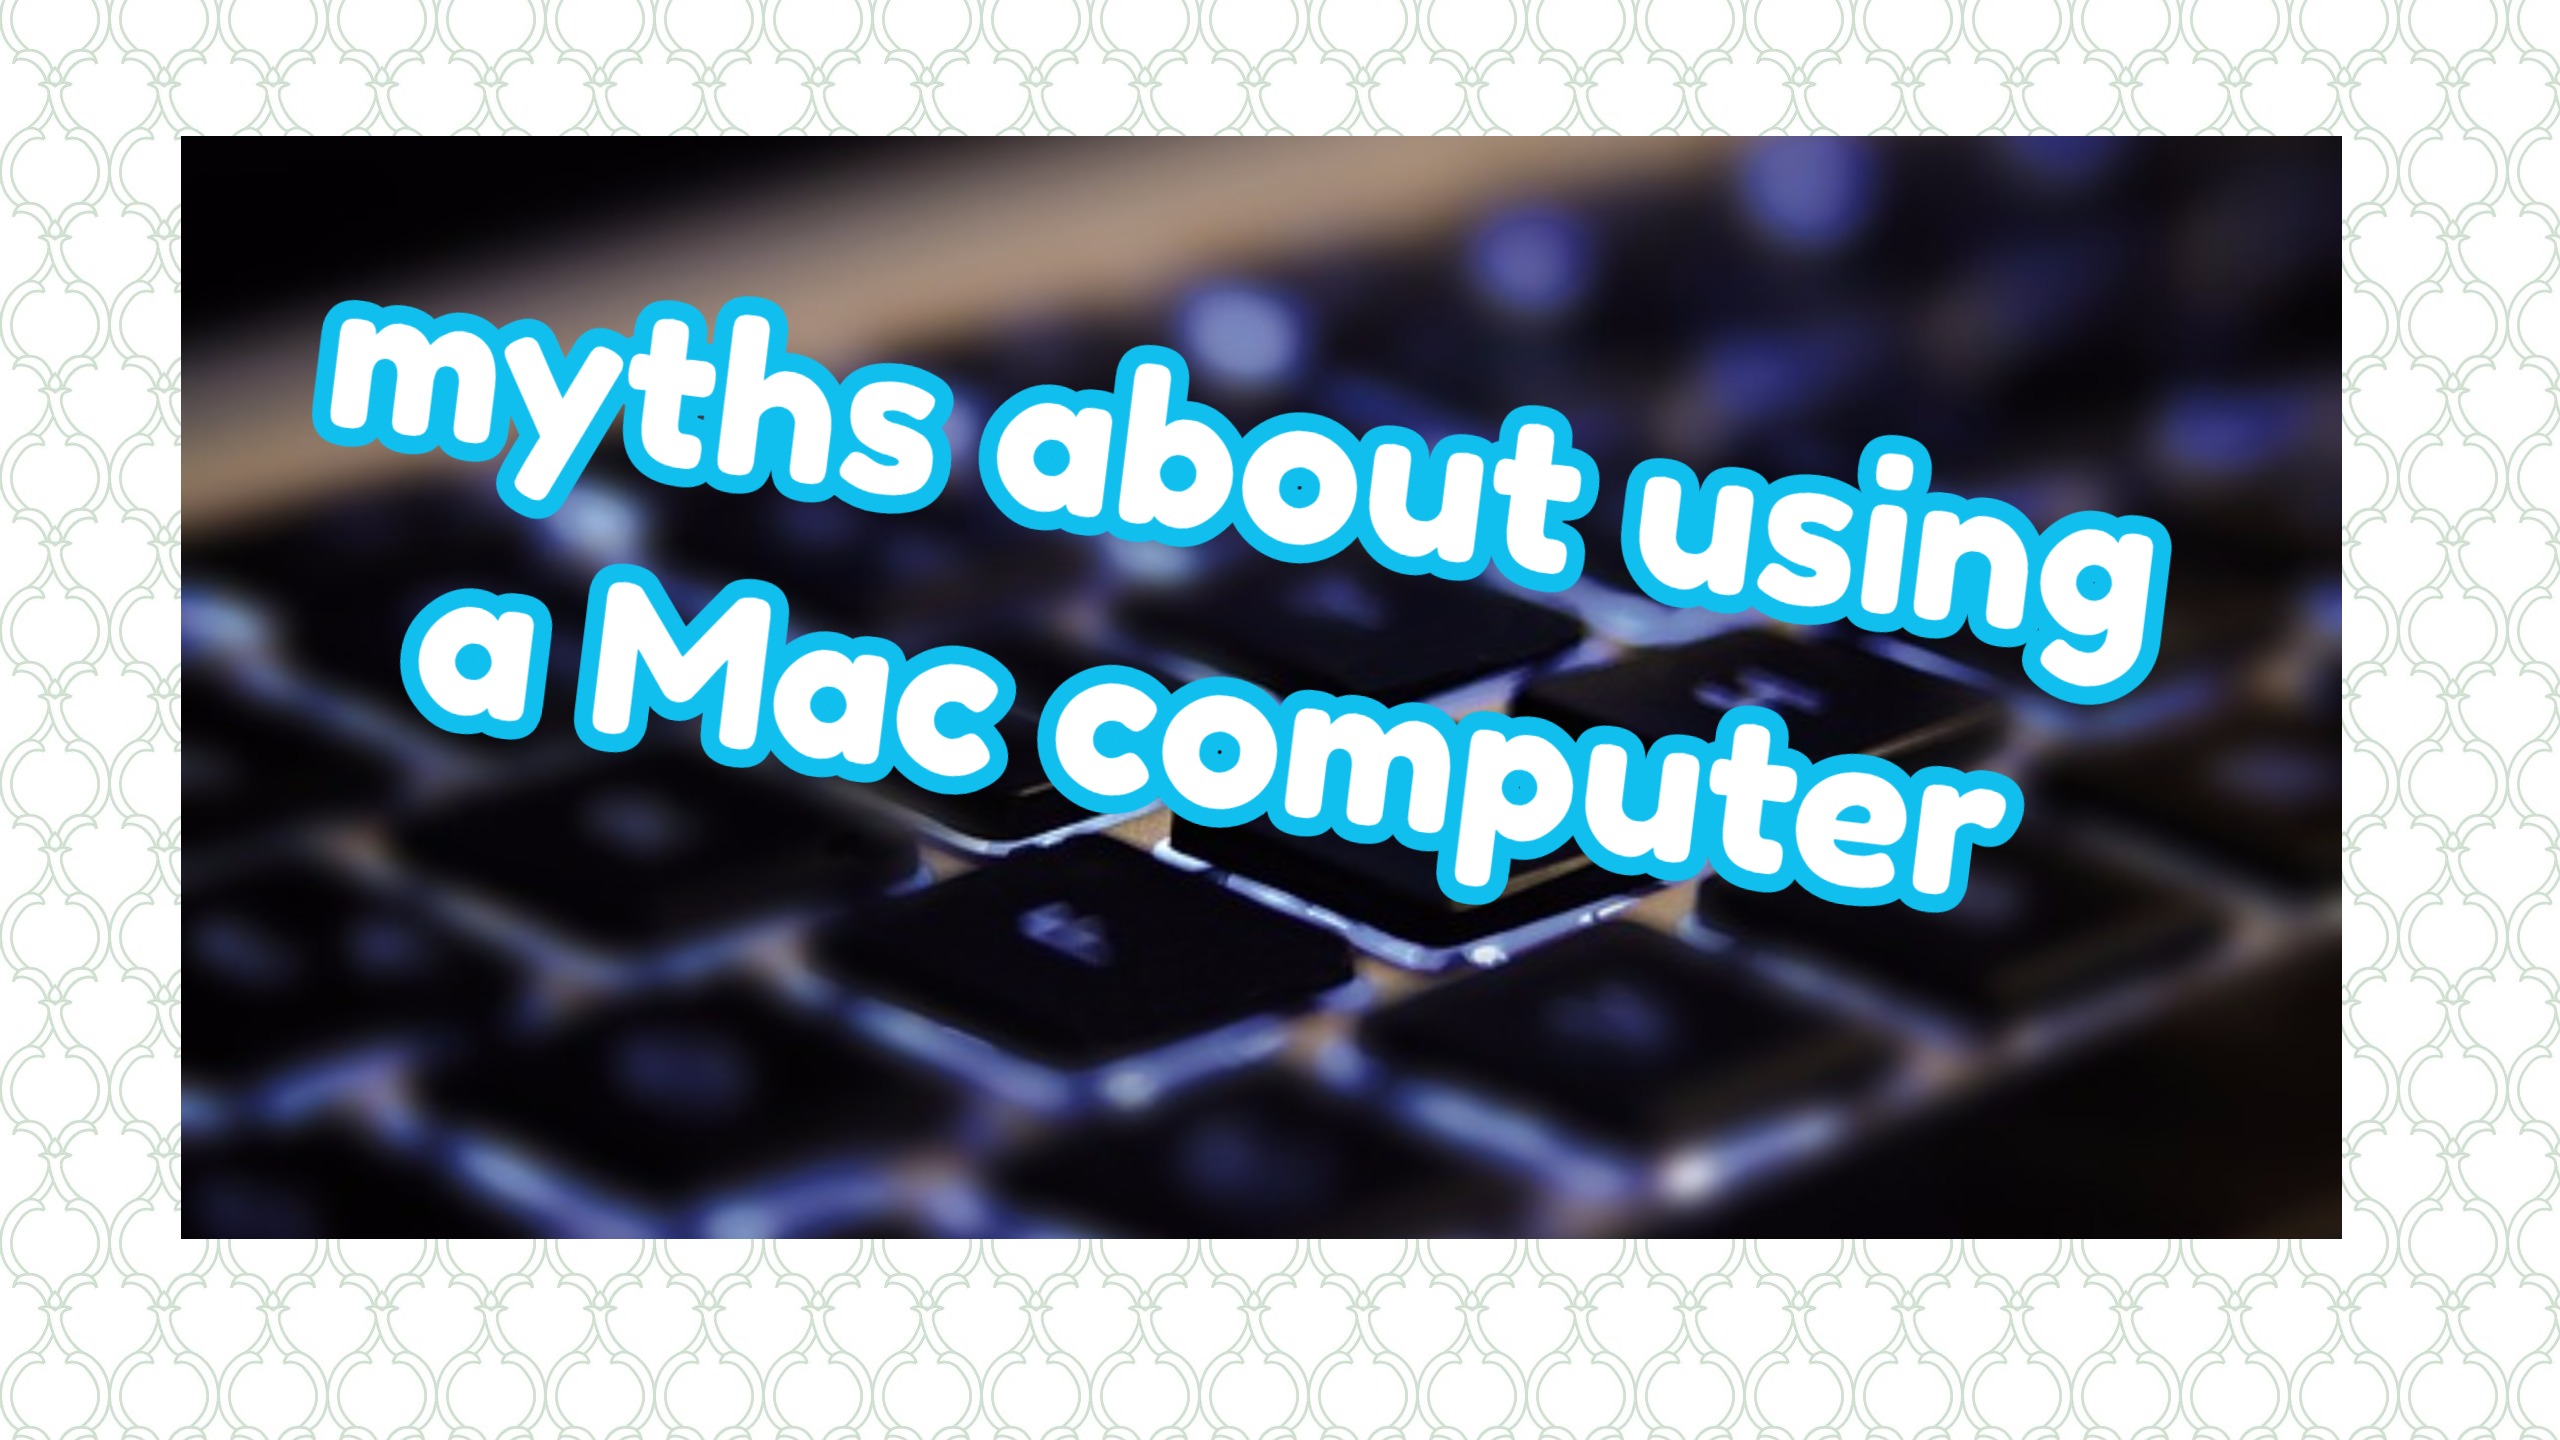 myths about using a Mac computer pic